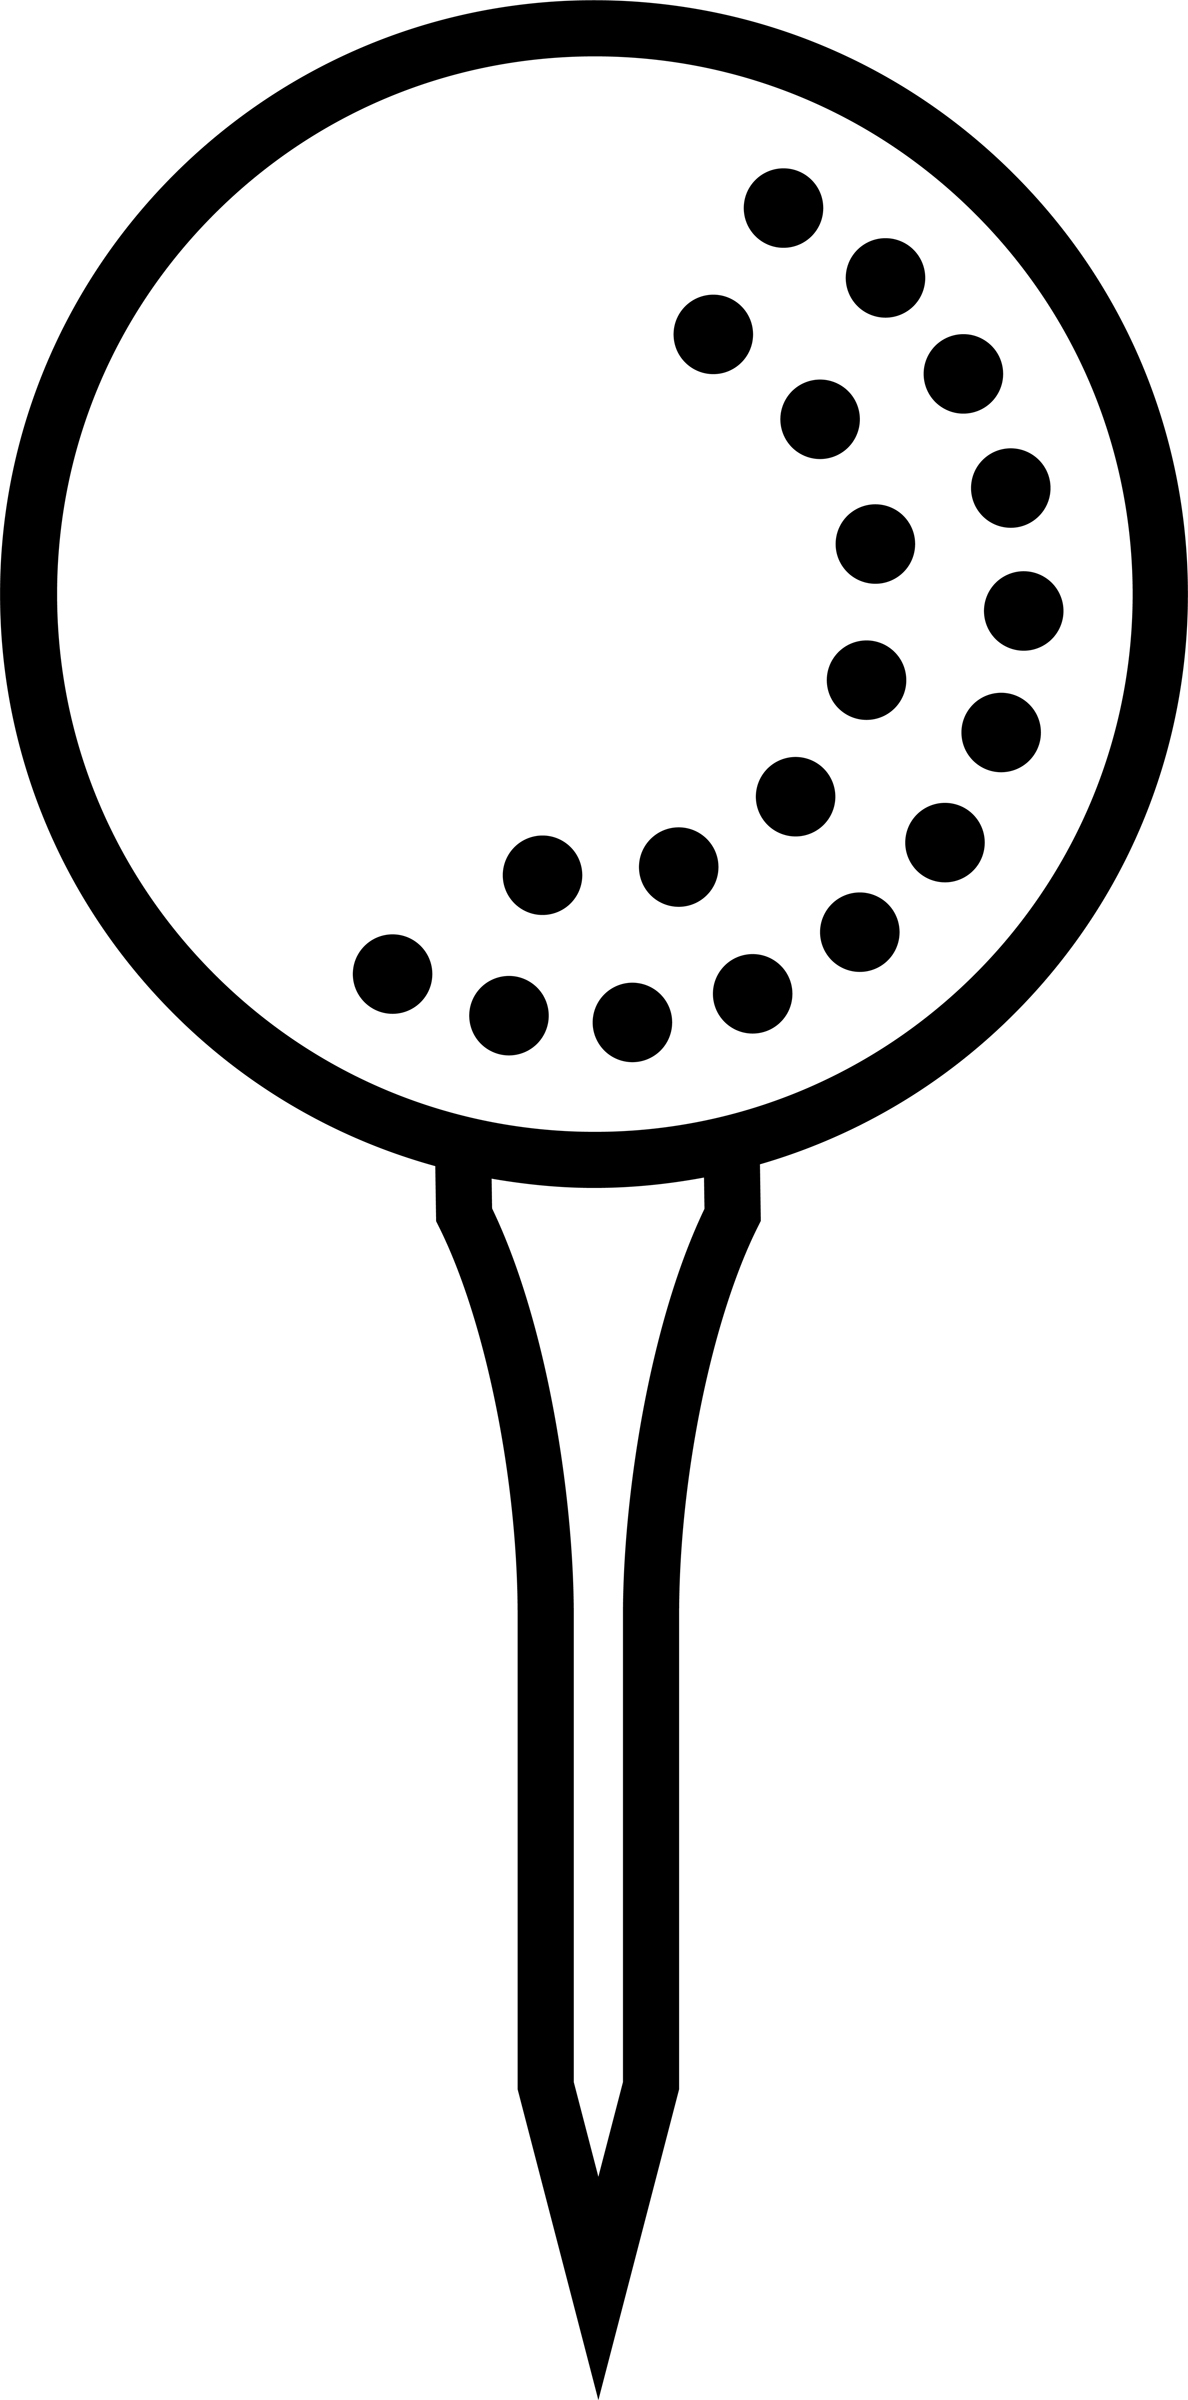 Golf Ball Tee Clip Art | Clipart library - Free Clipart Images